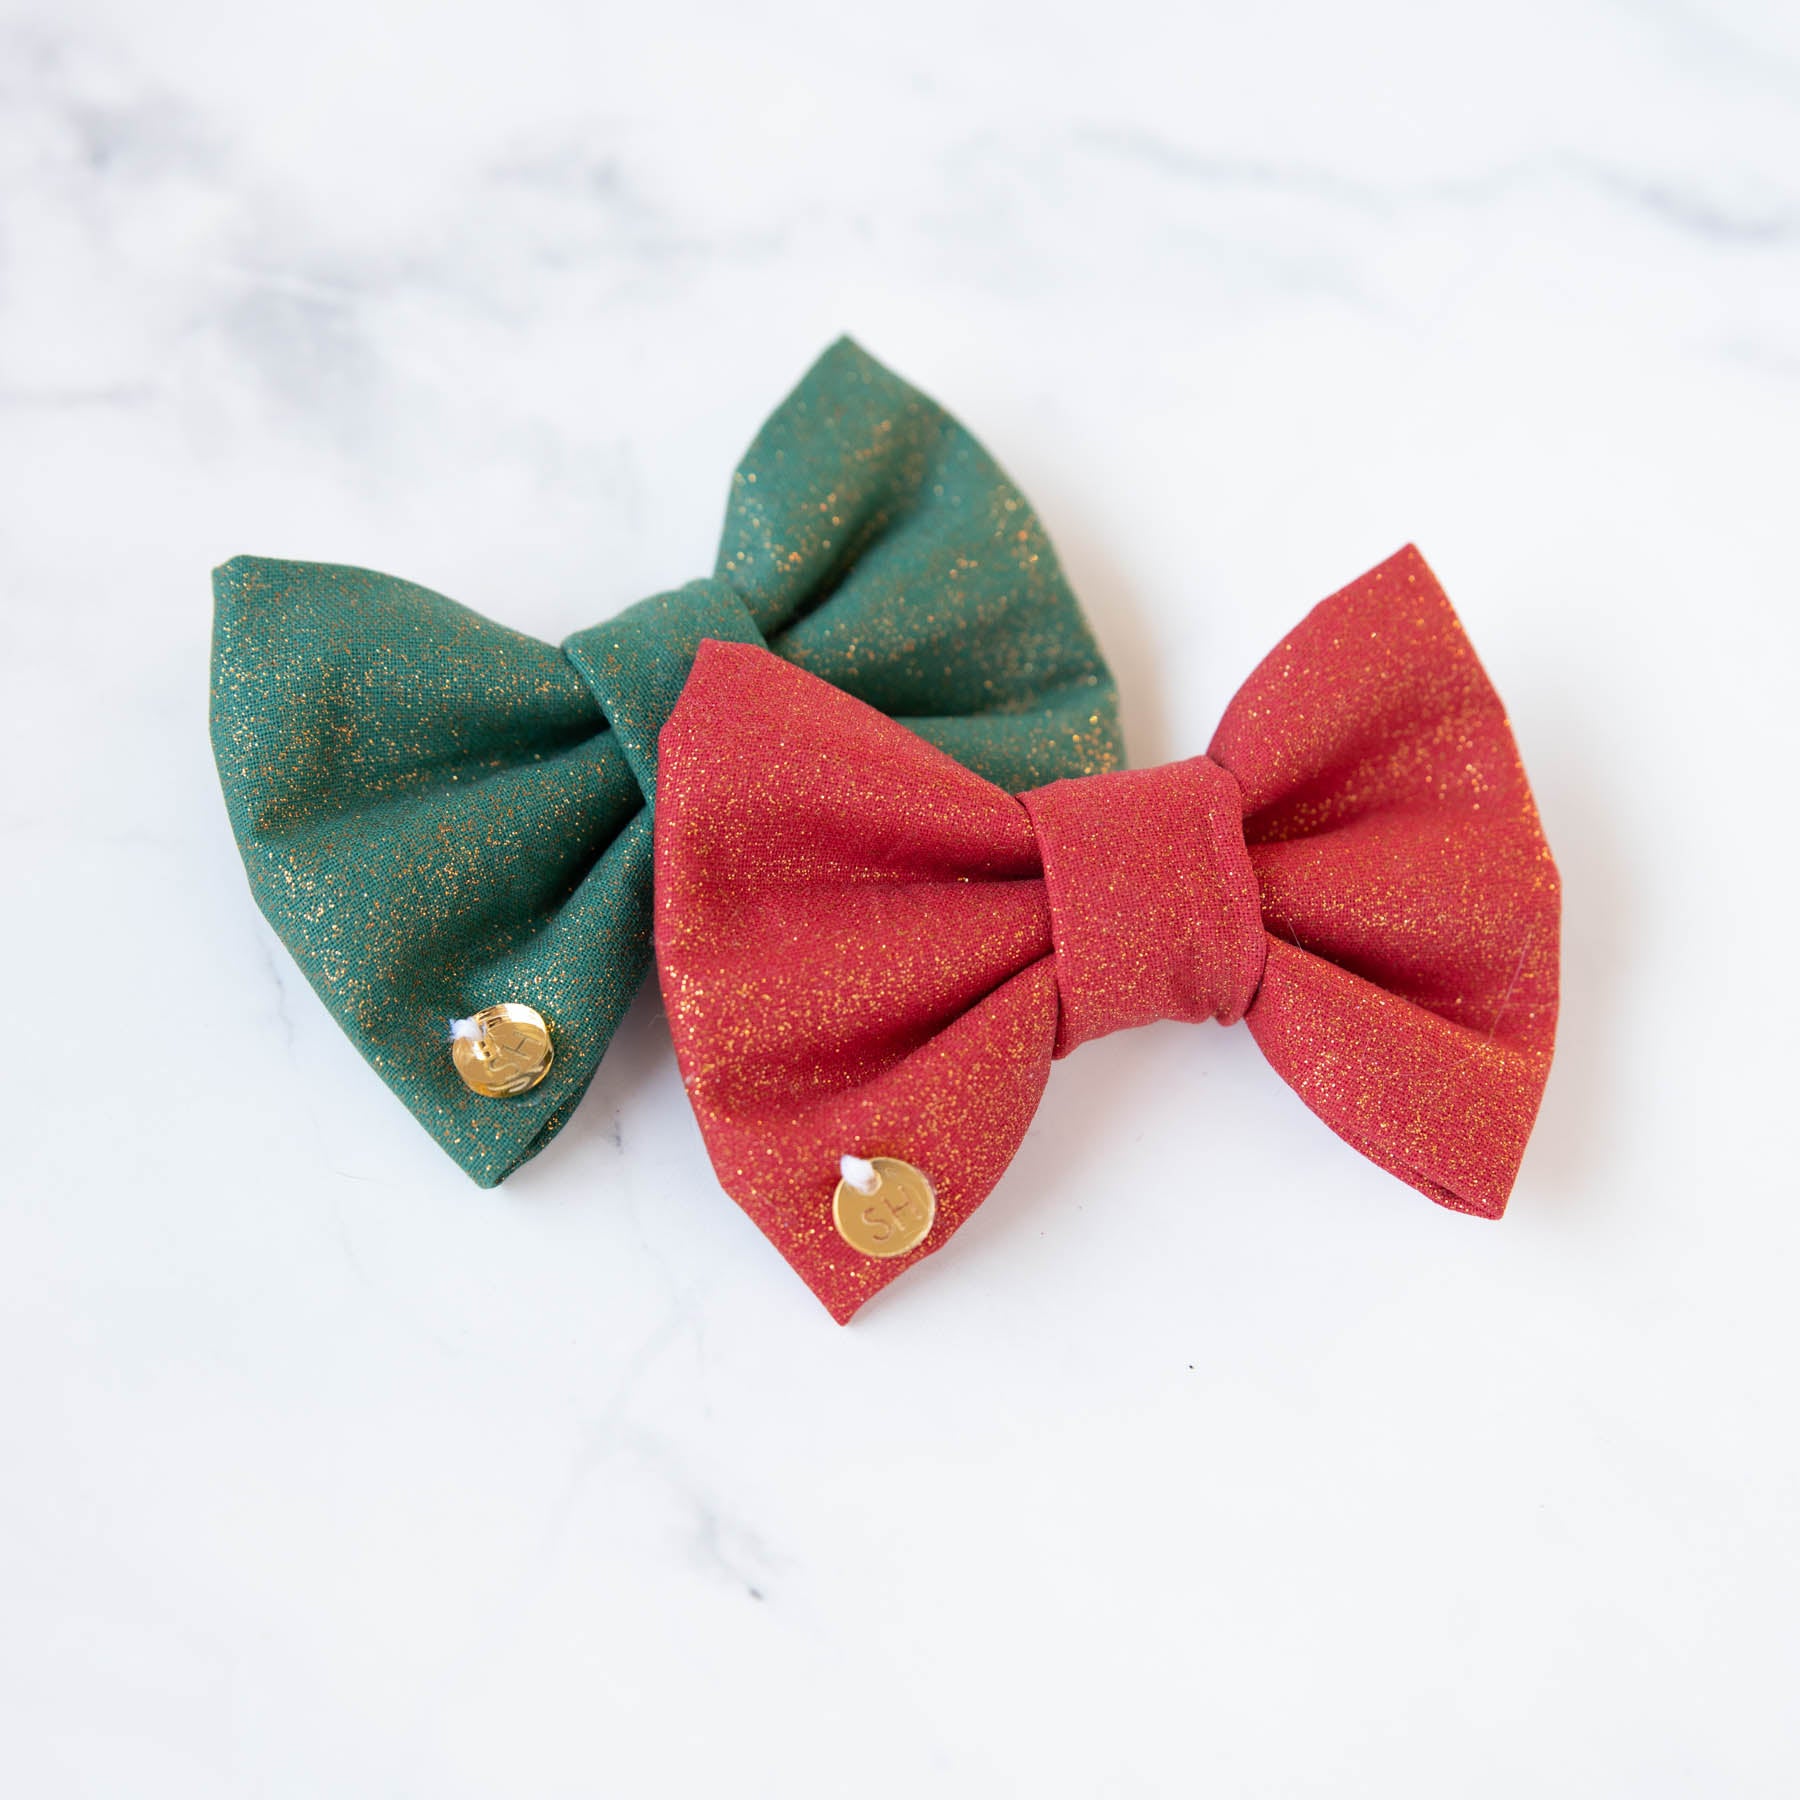 Bell Dog Bow Tie